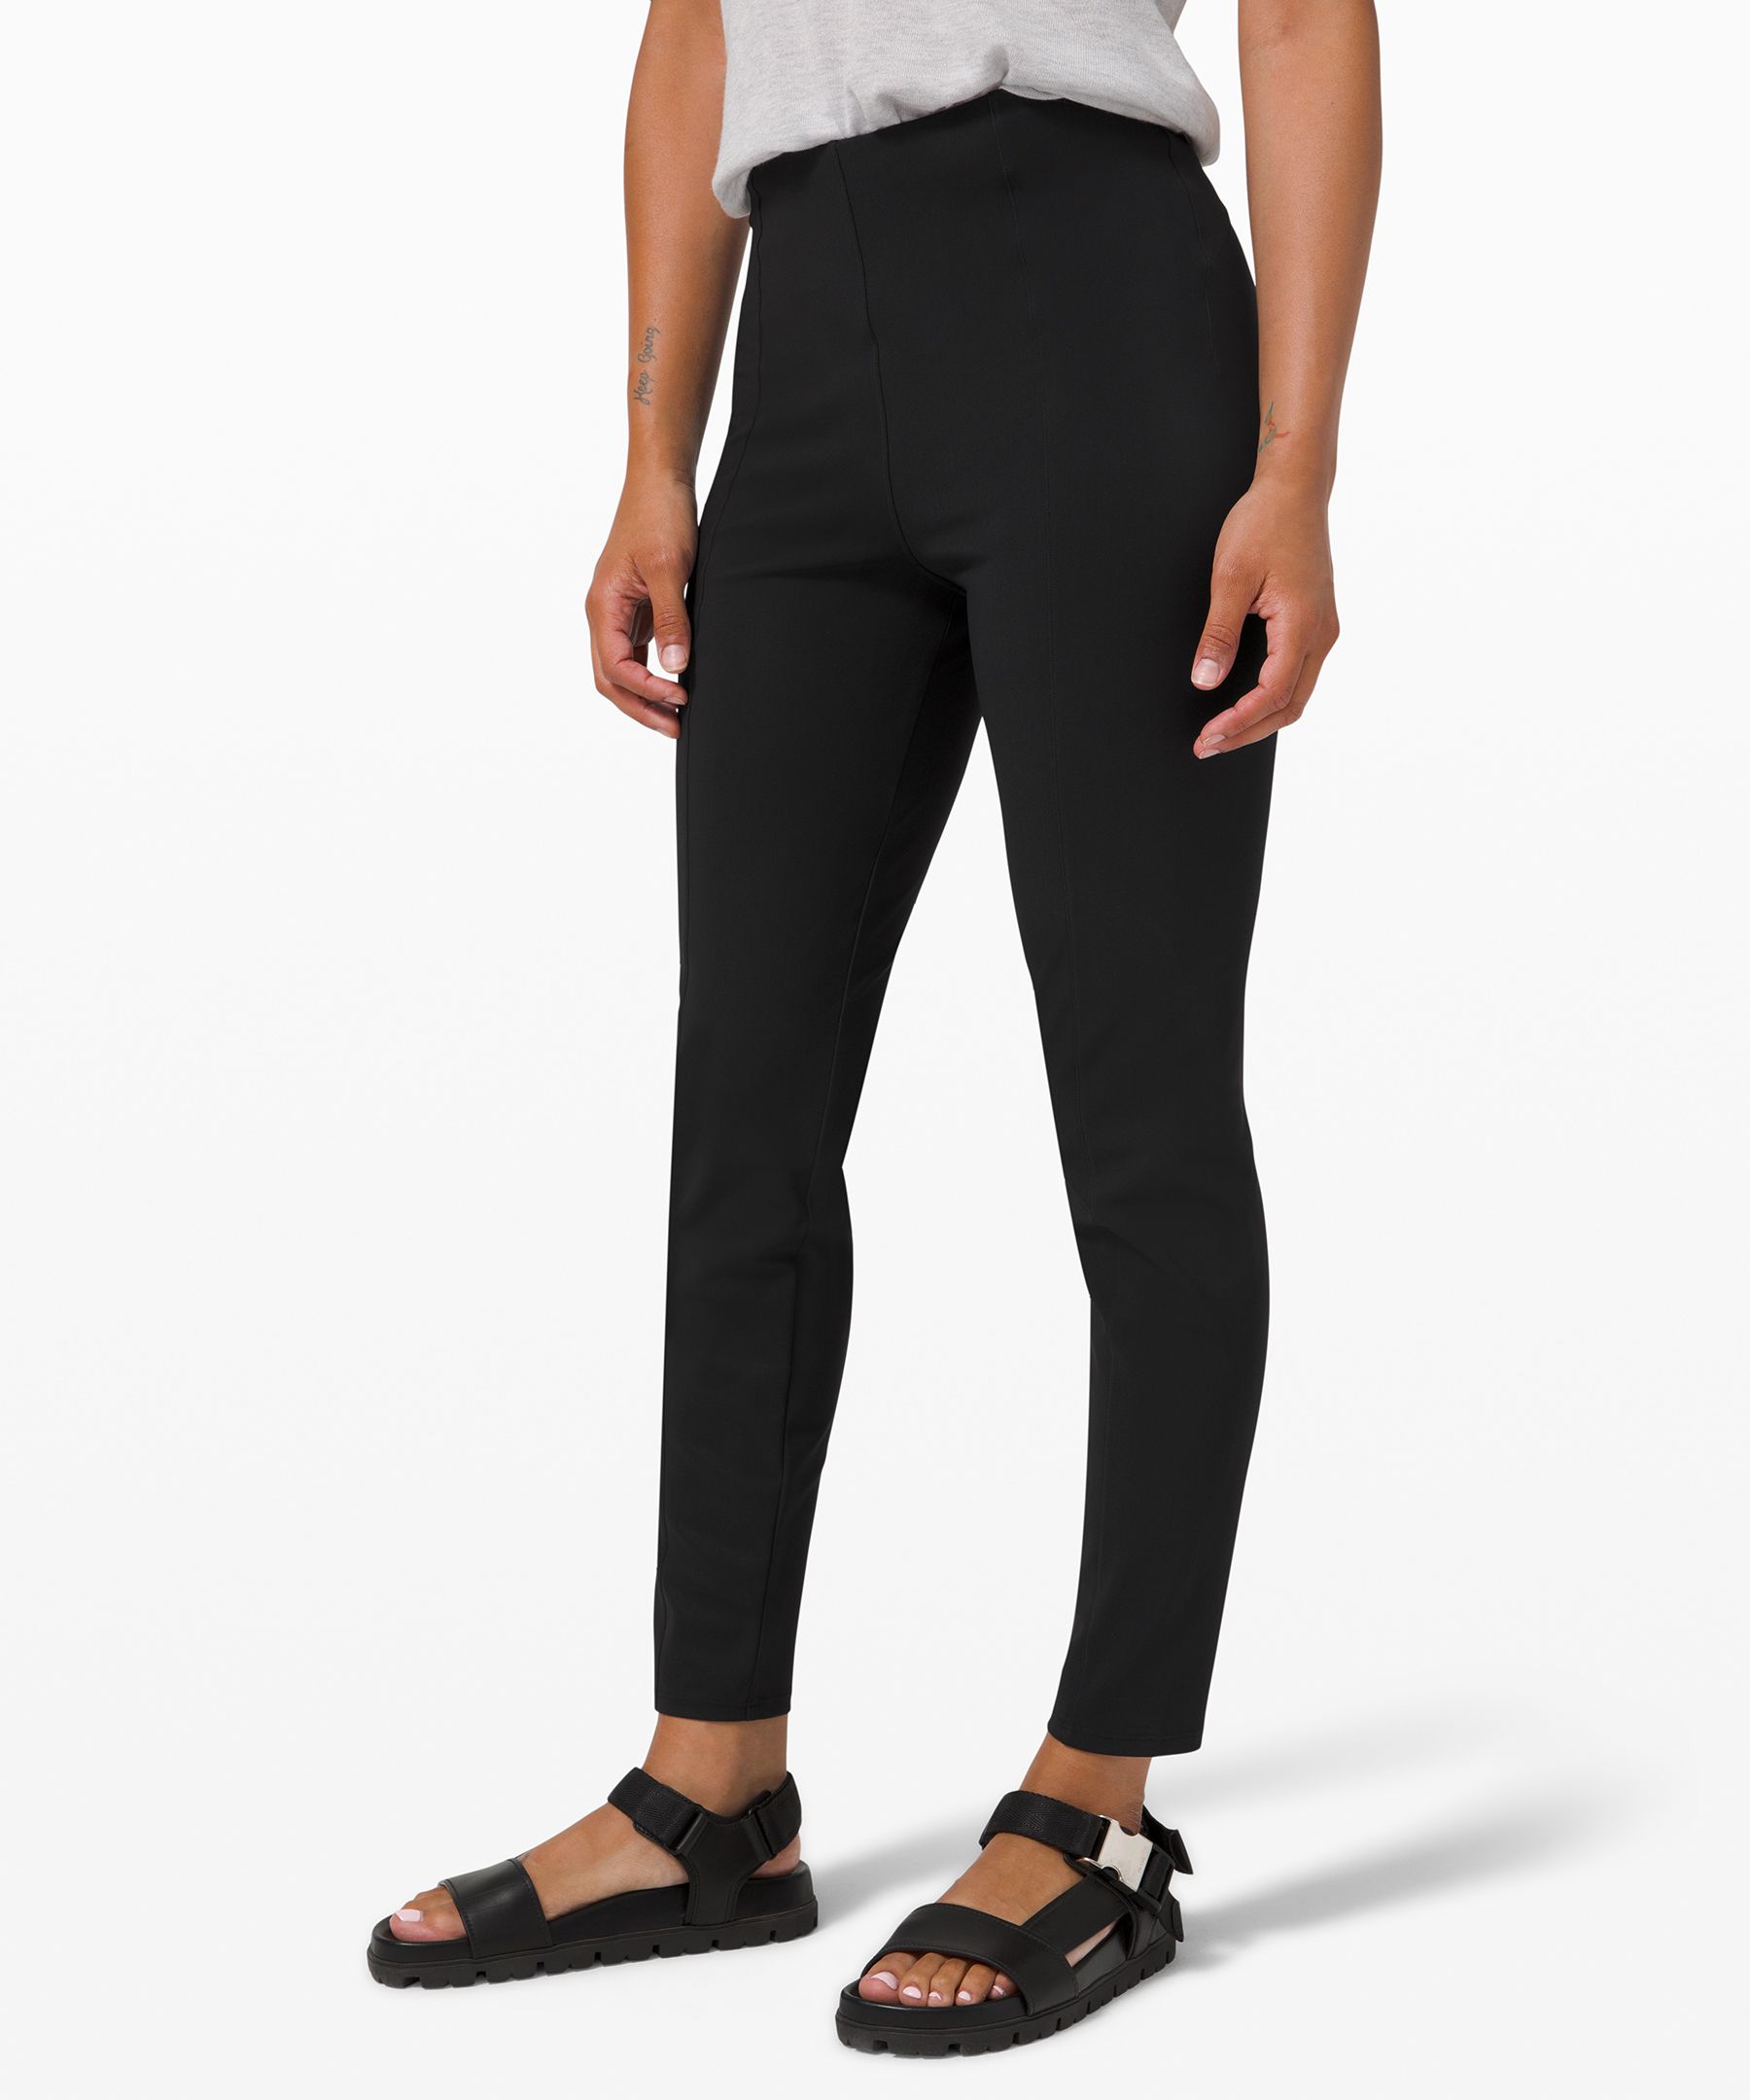 Lululemon Here to There High Rise 7/8 Pant Slim Trouser Black Sz 4